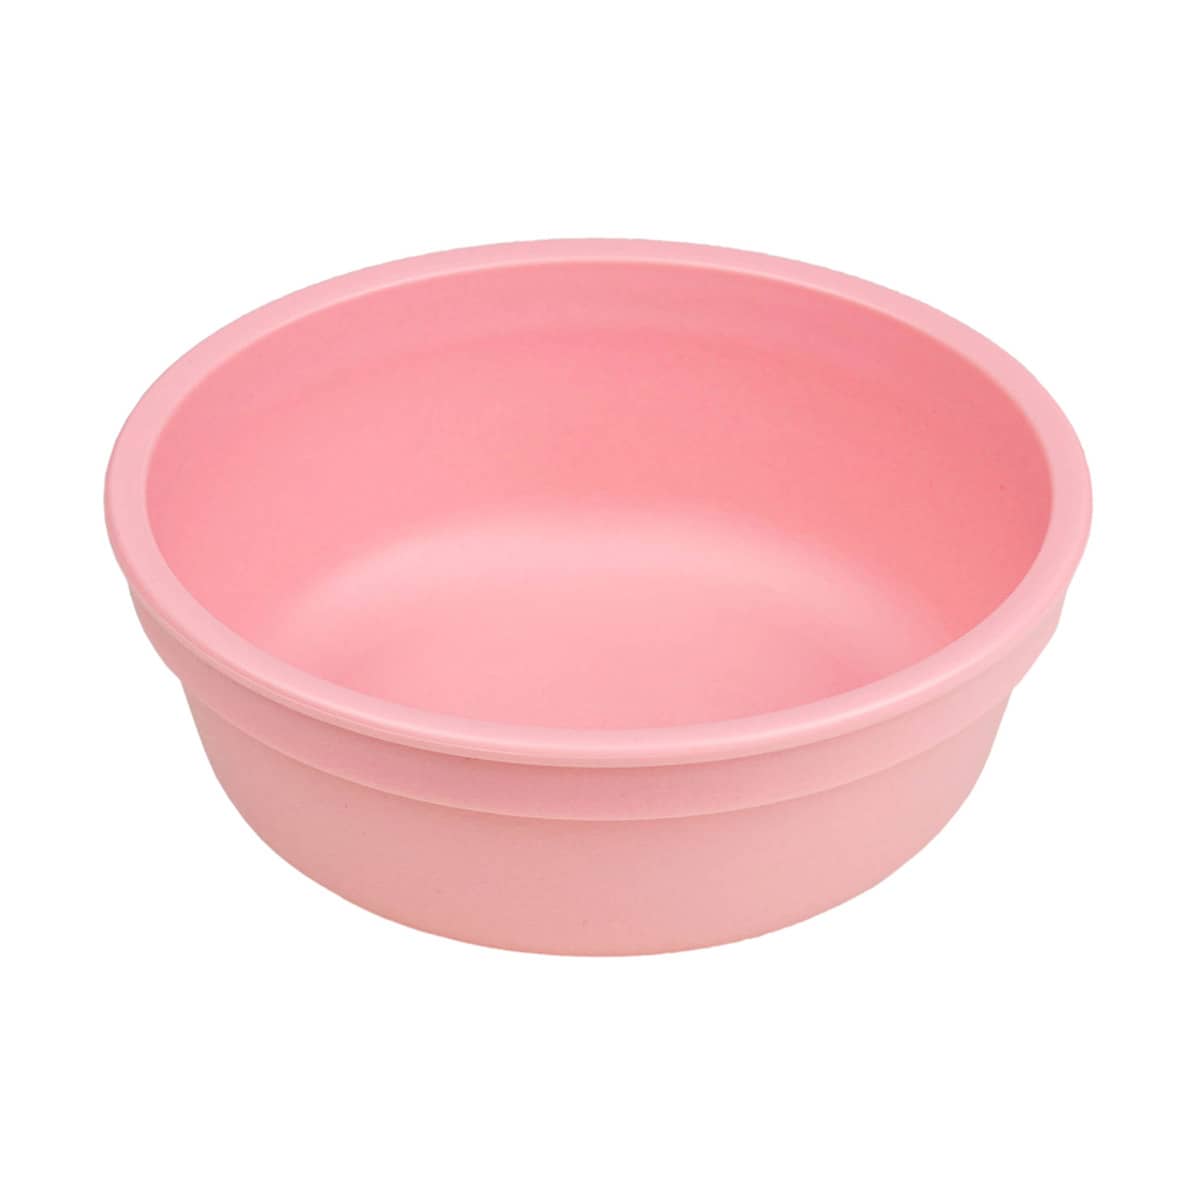 Re-Play Recycled Bowl - Baby Pink